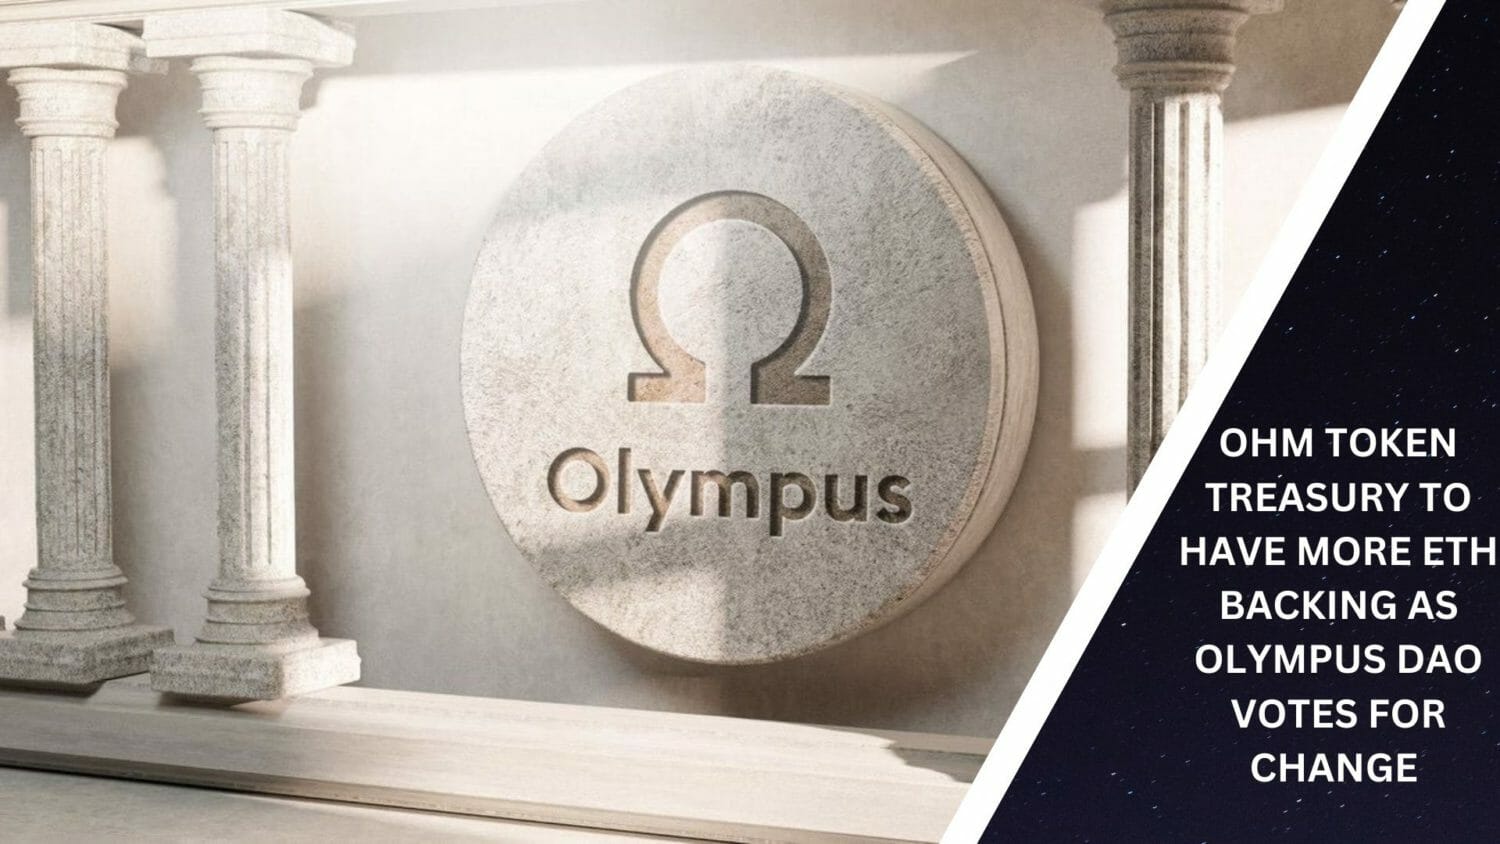 Ohm Token Treasury To Have More Eth Backing As Olympus Dao Votes For Change